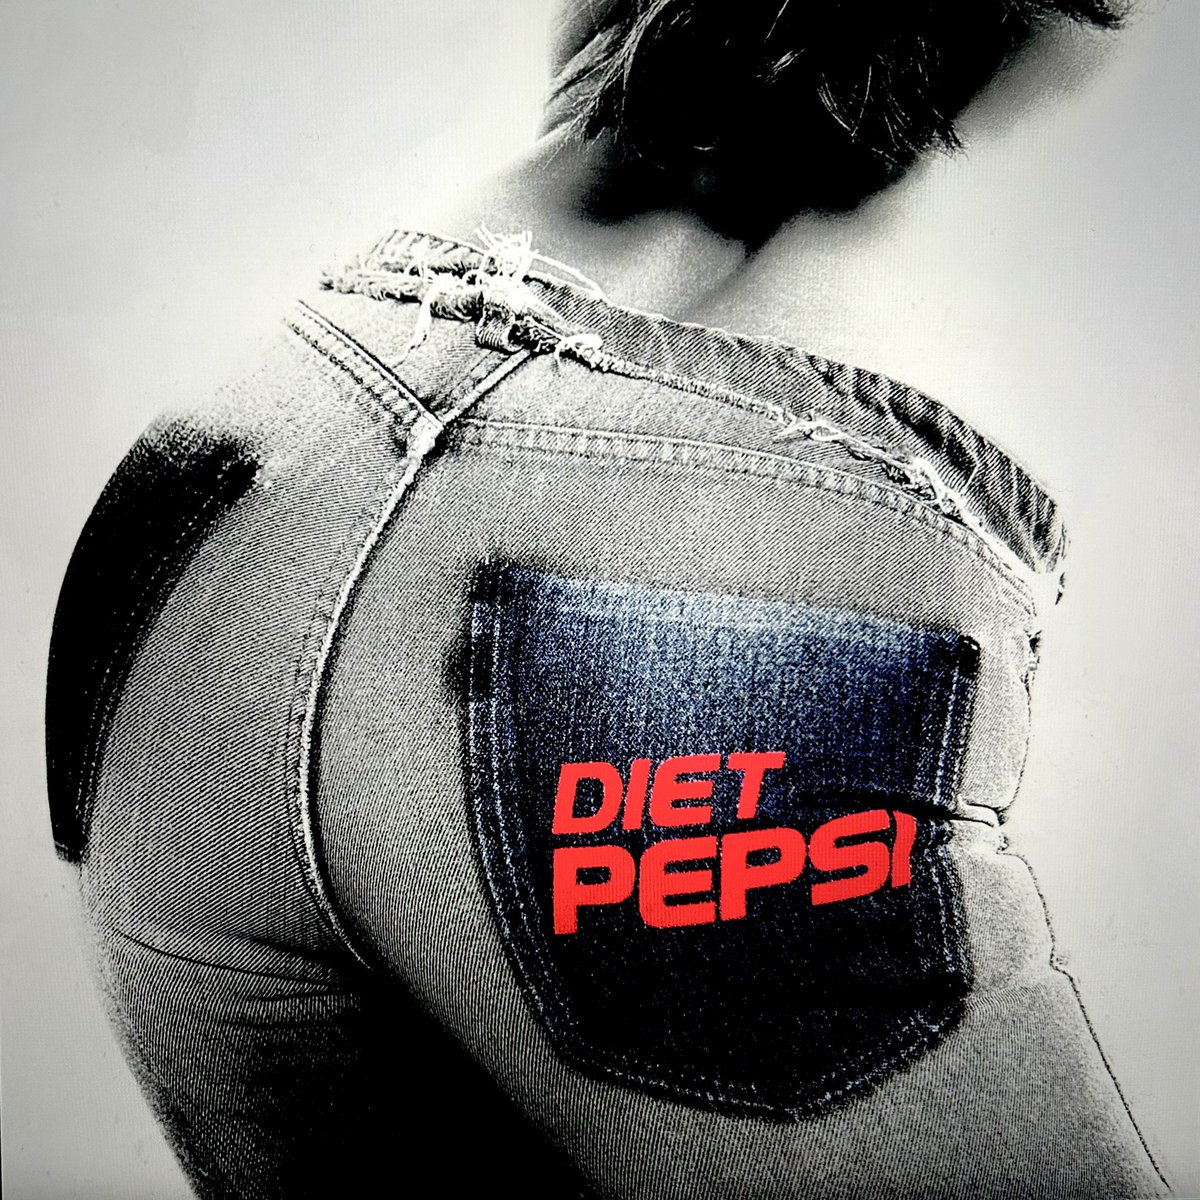 Addison Rae recently released the album art and title of her new single Diet Pepsi